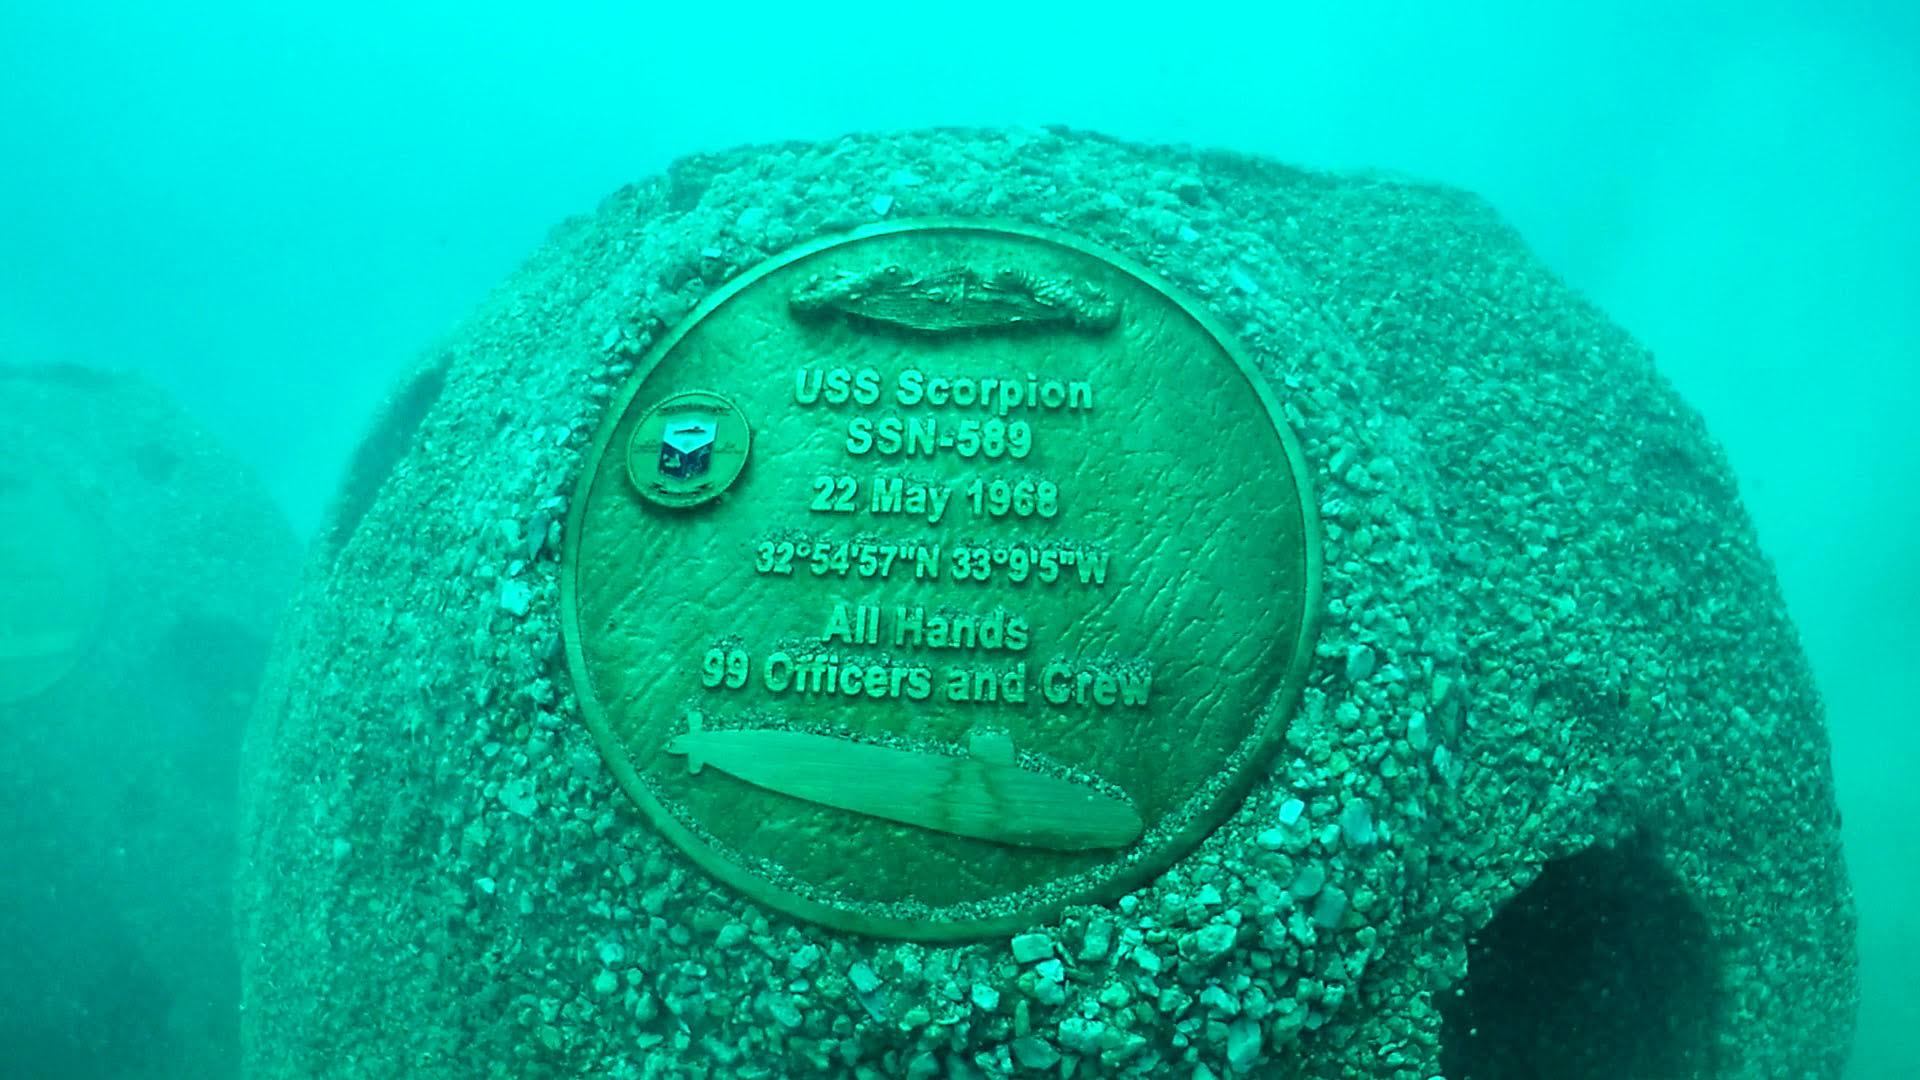 Each memorial features a plaque with the name of a sunken submarine and how many crew members were lost. 